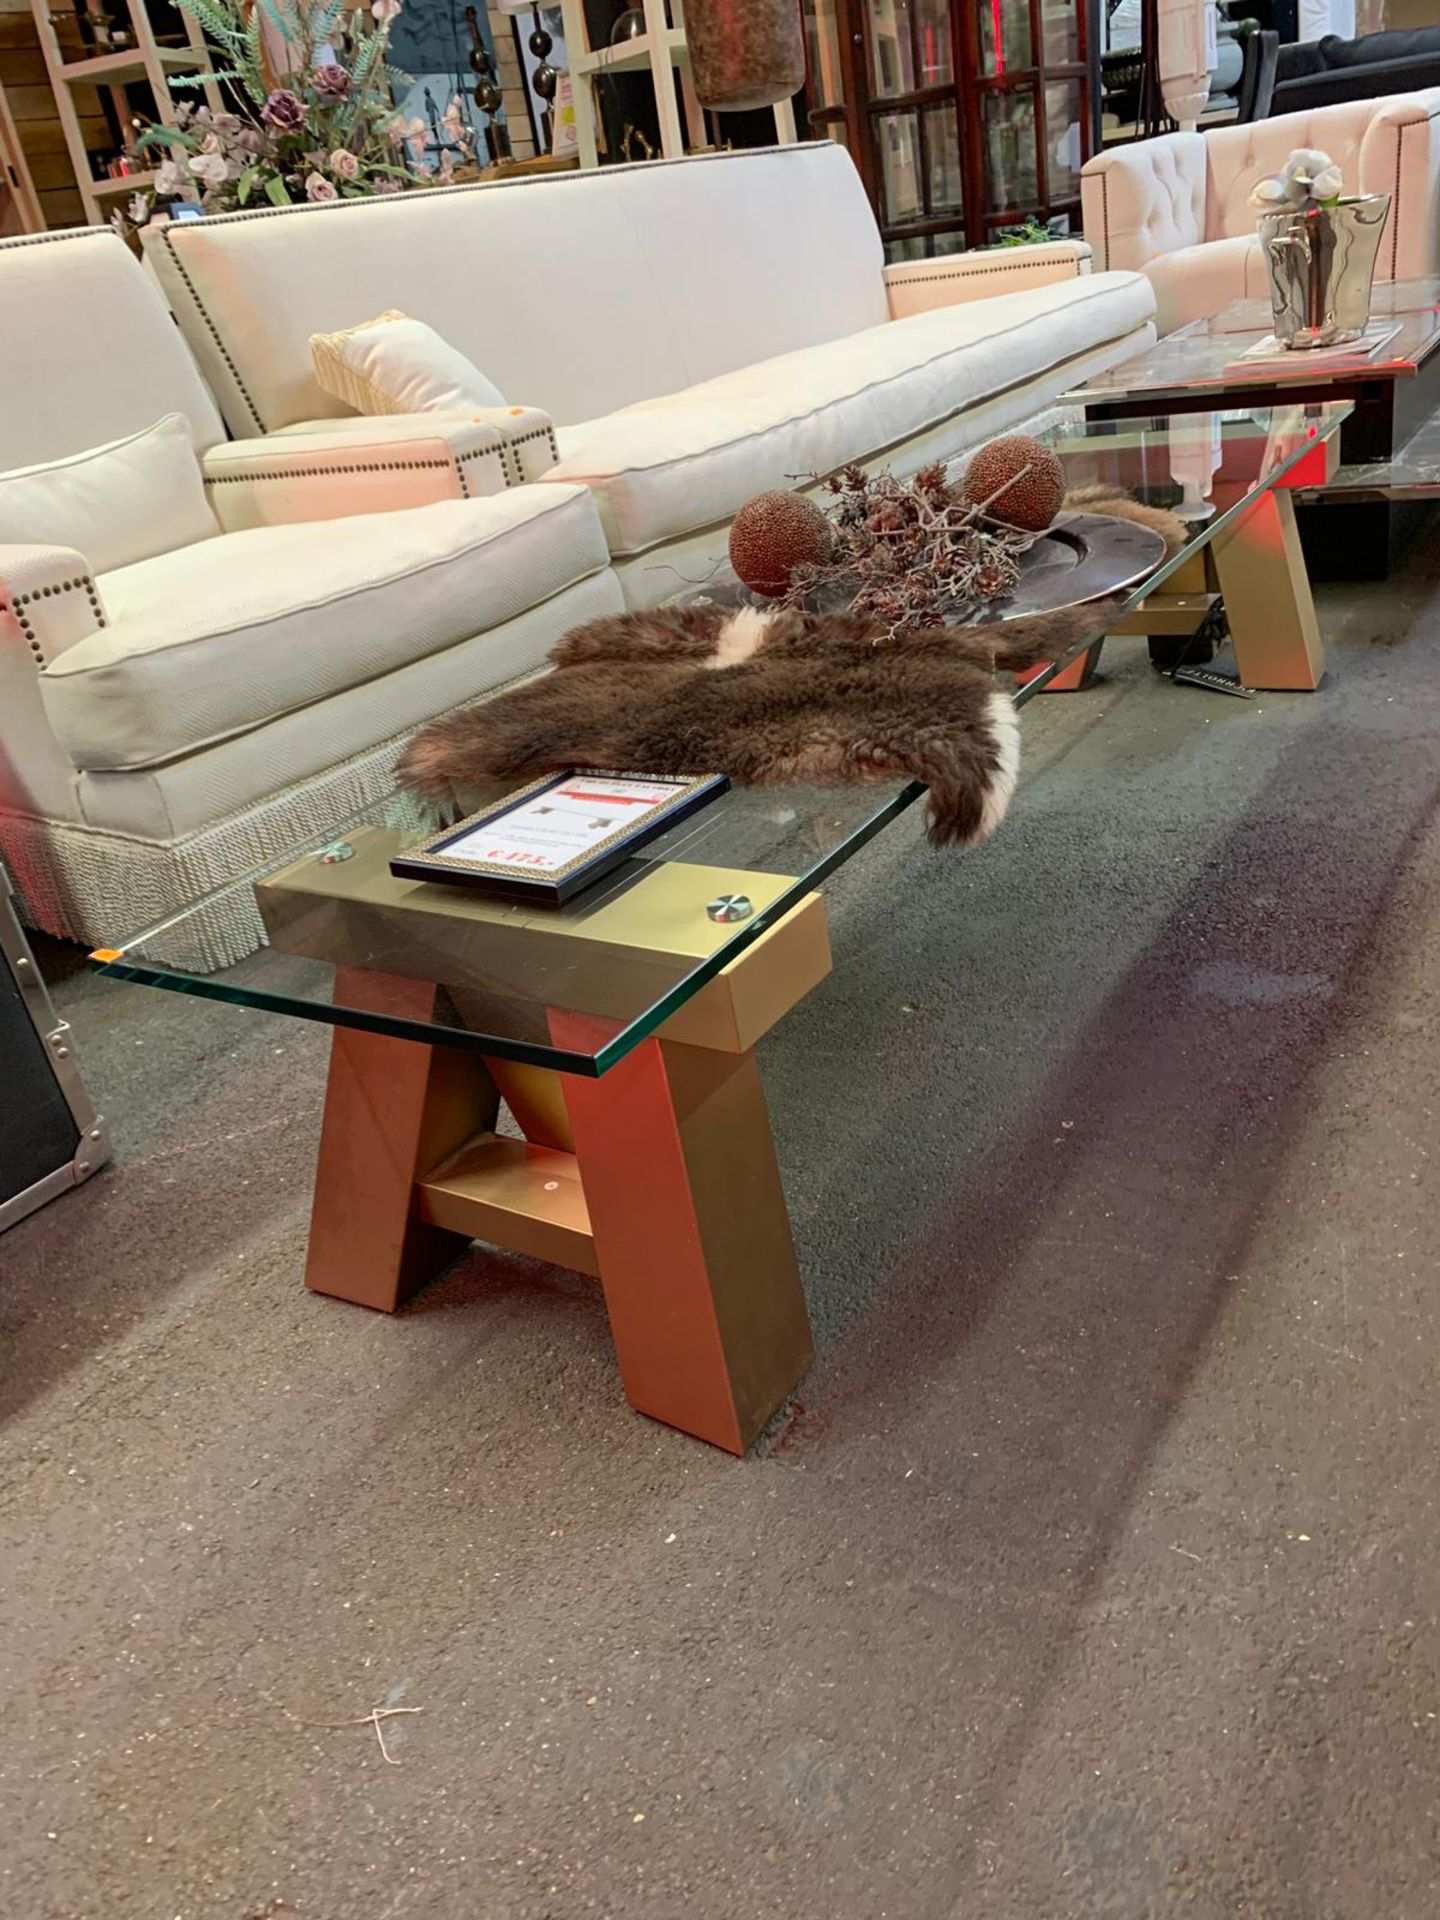 Eichholz Coffee Table Marathon The Marathon Is A Stricking Long Coffee Table With Glass Surface &